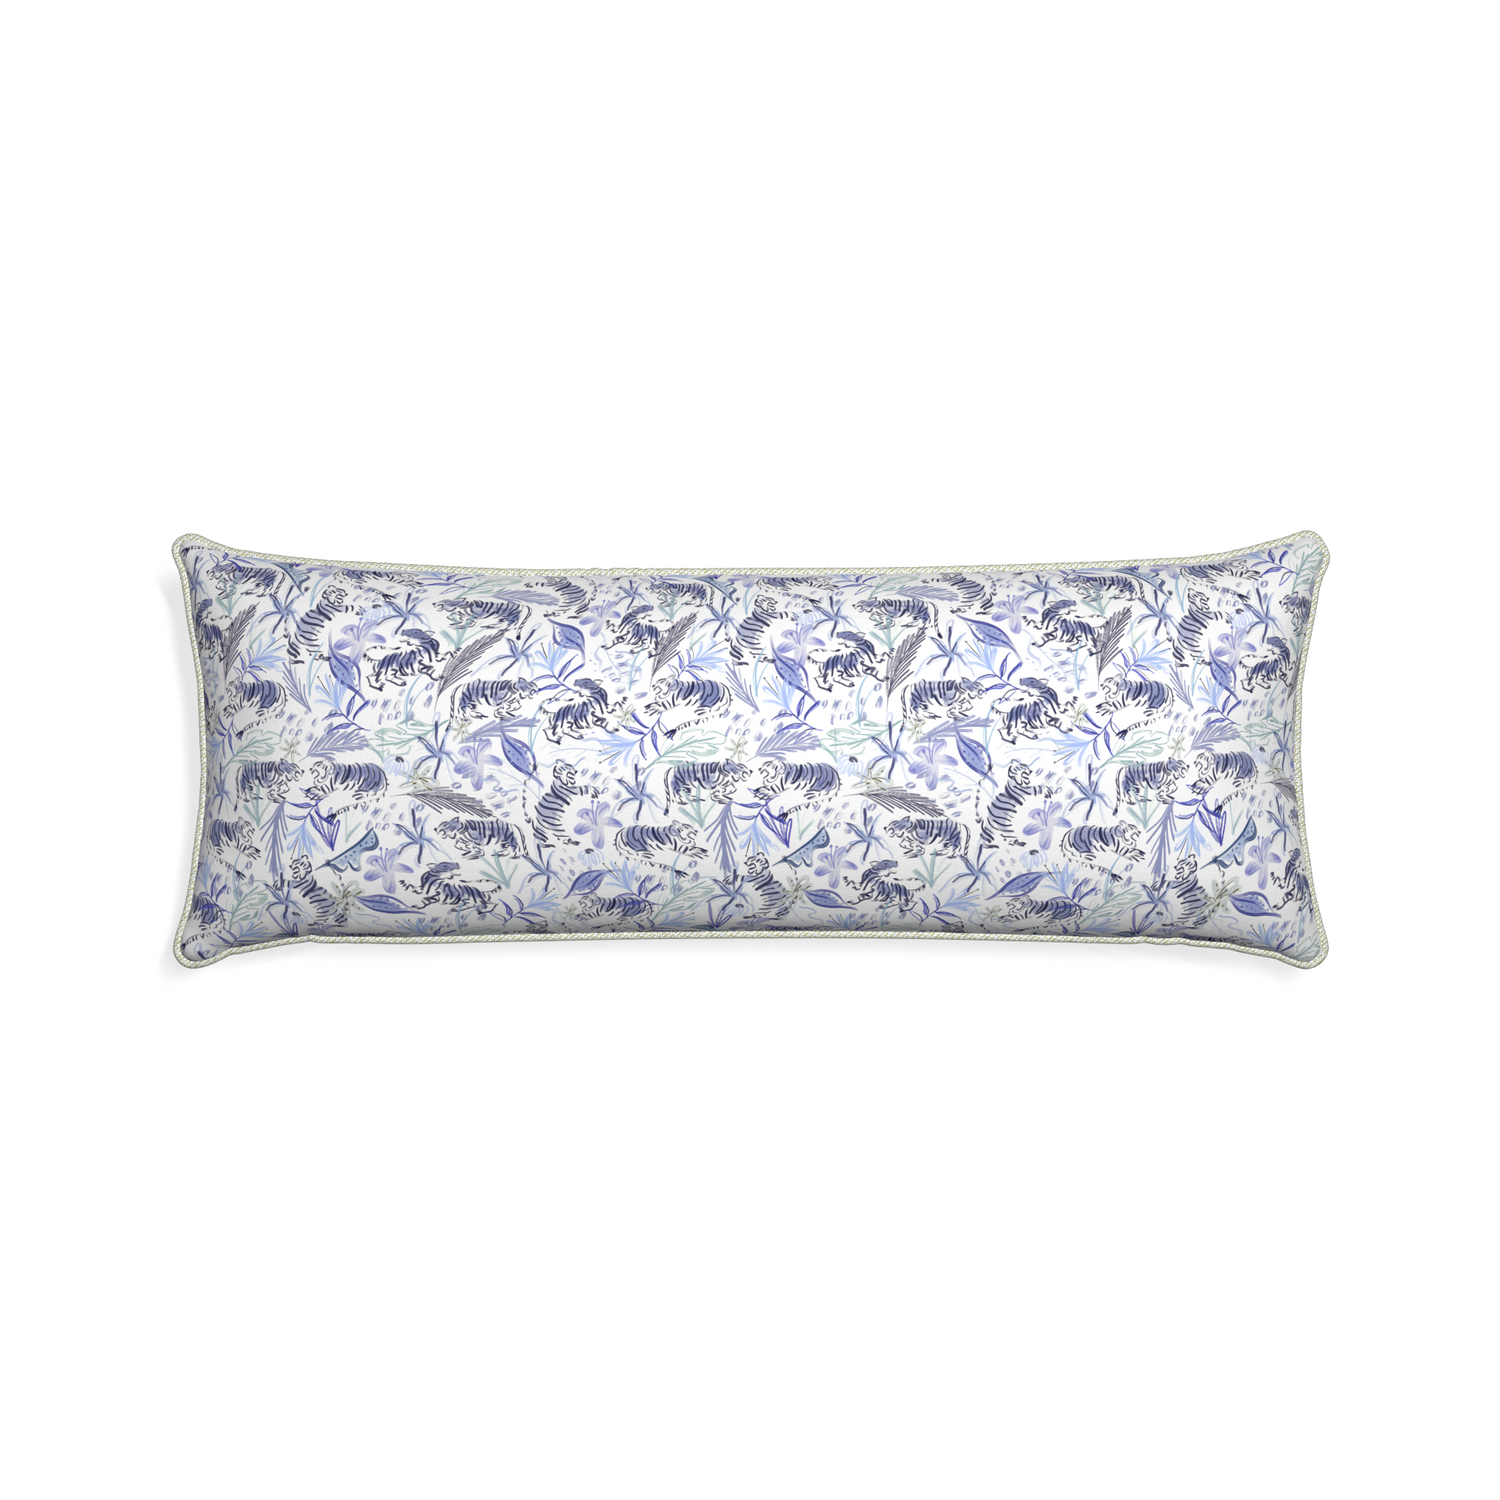 Xl-lumbar frida blue custom blue with intricate tiger designpillow with l piping on white background